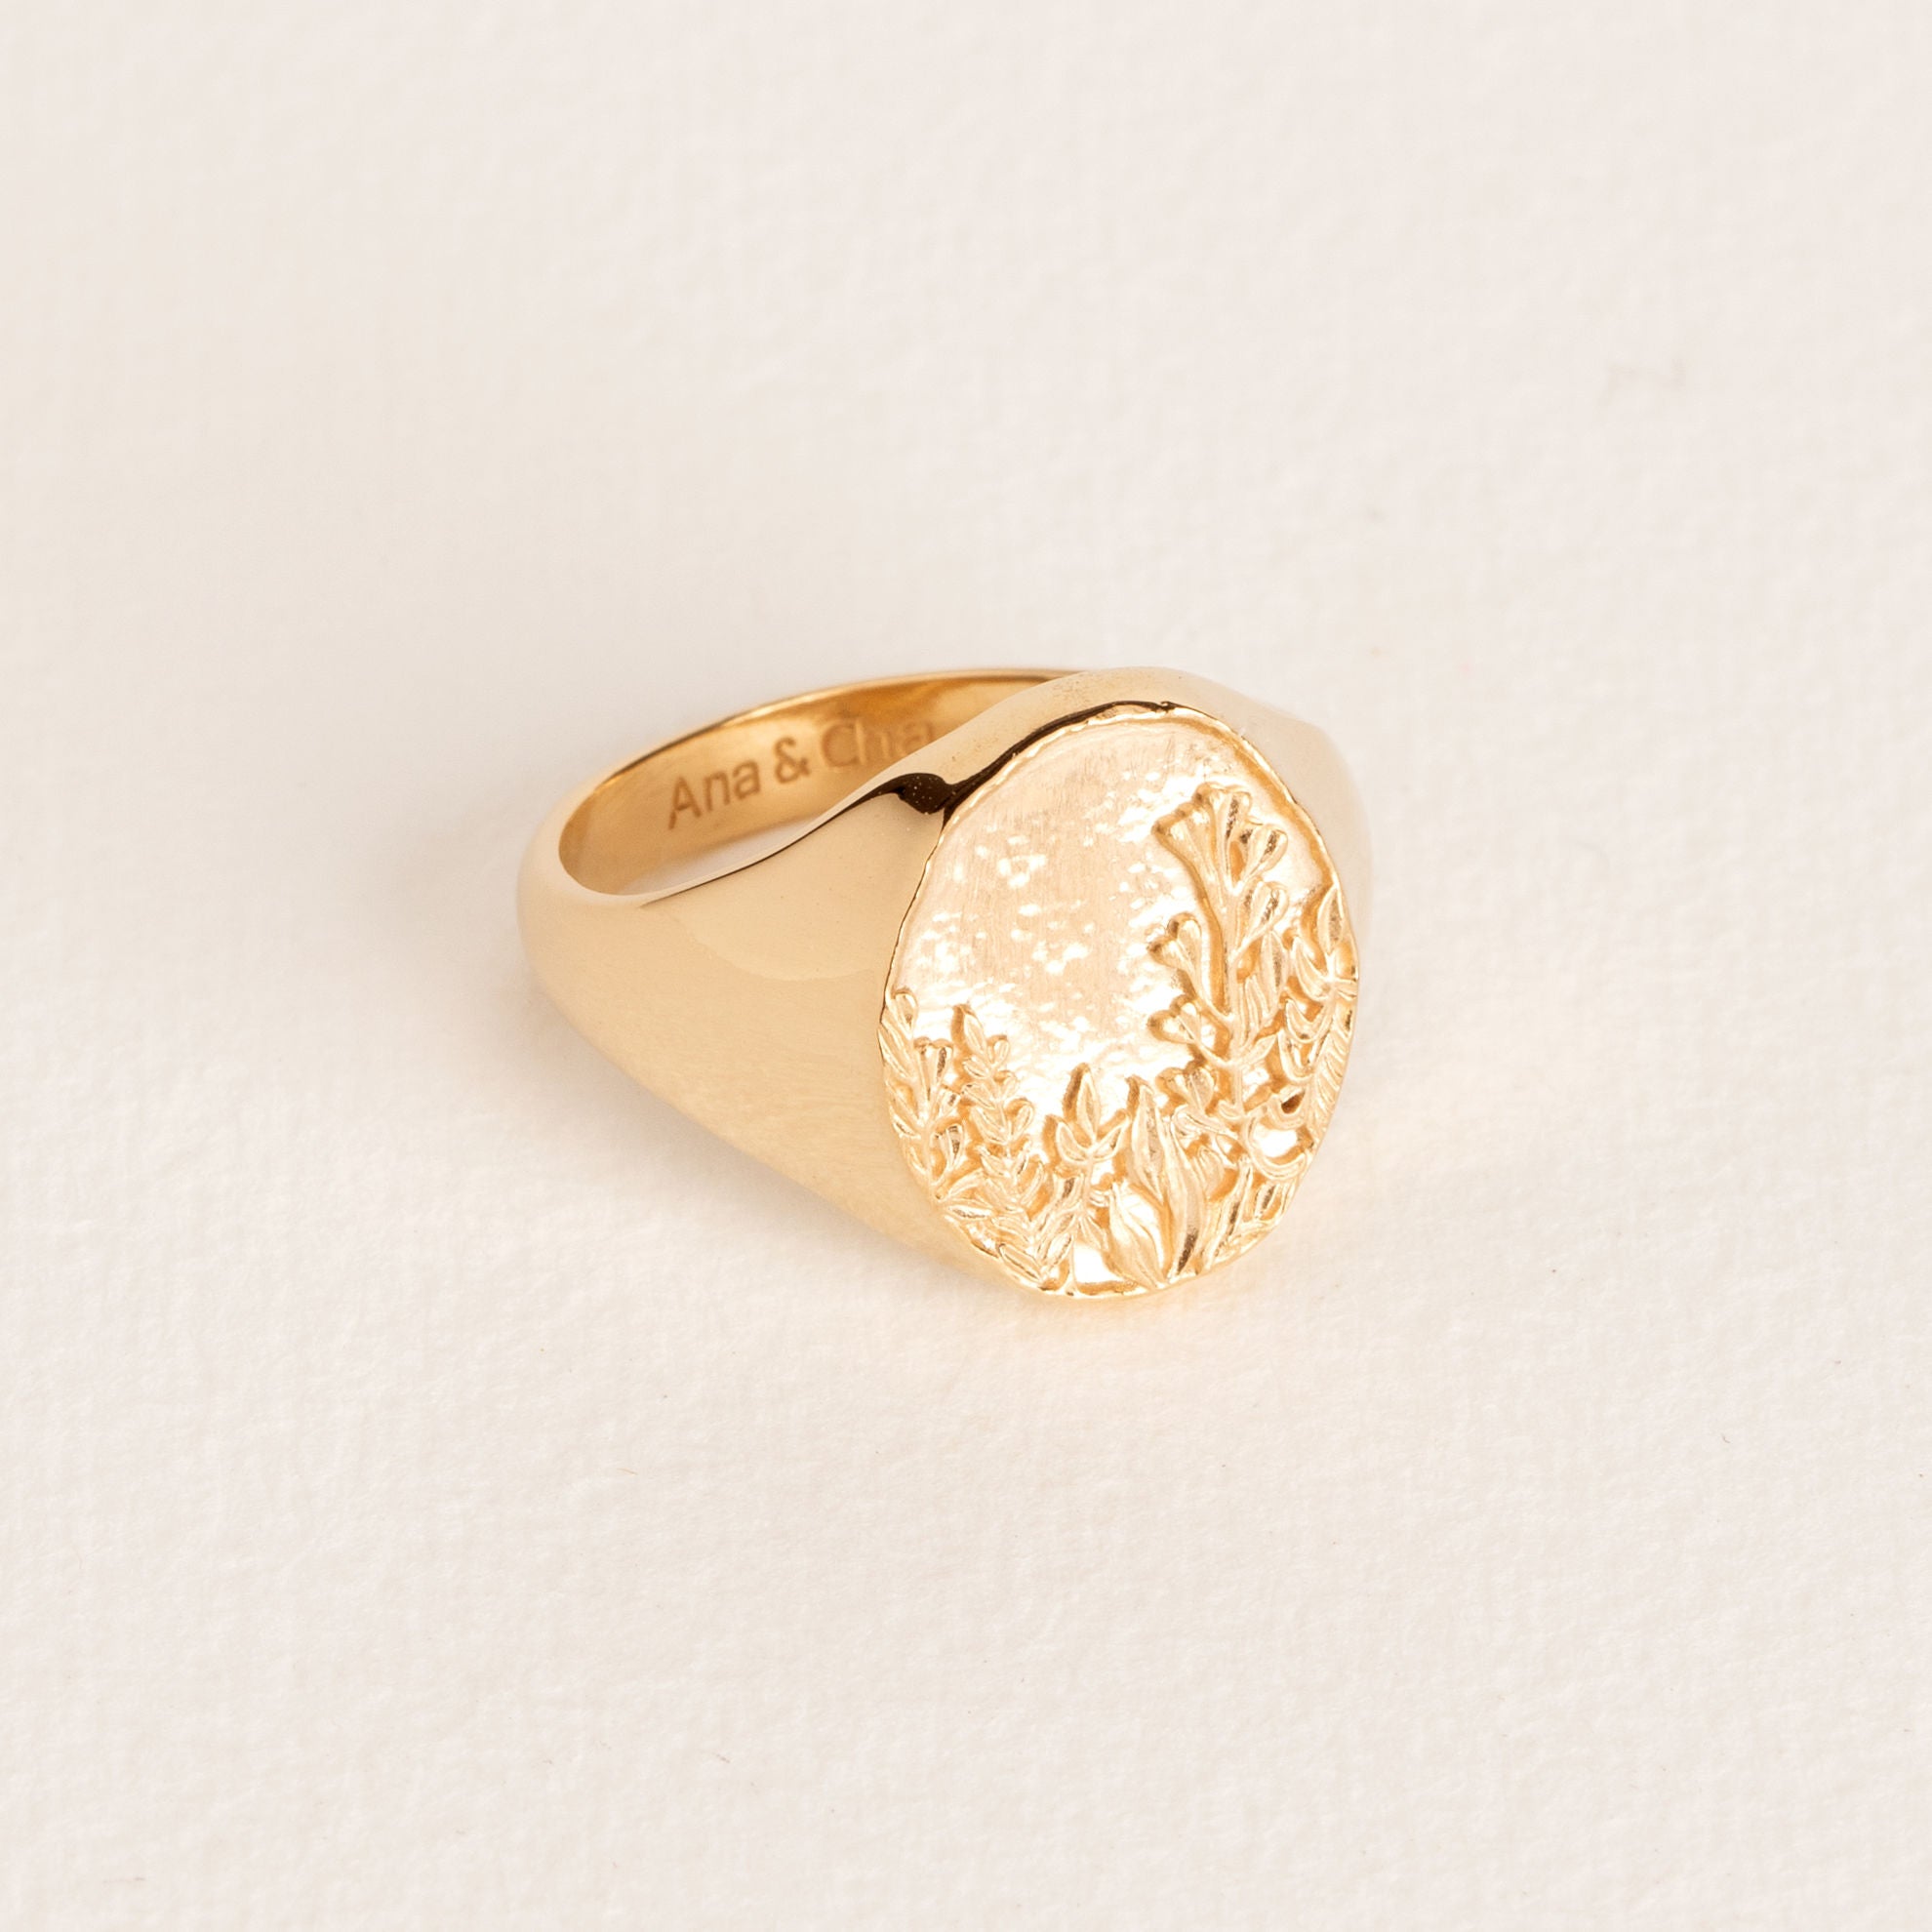 Yris - Gold Plated Ring - Ana et Cha